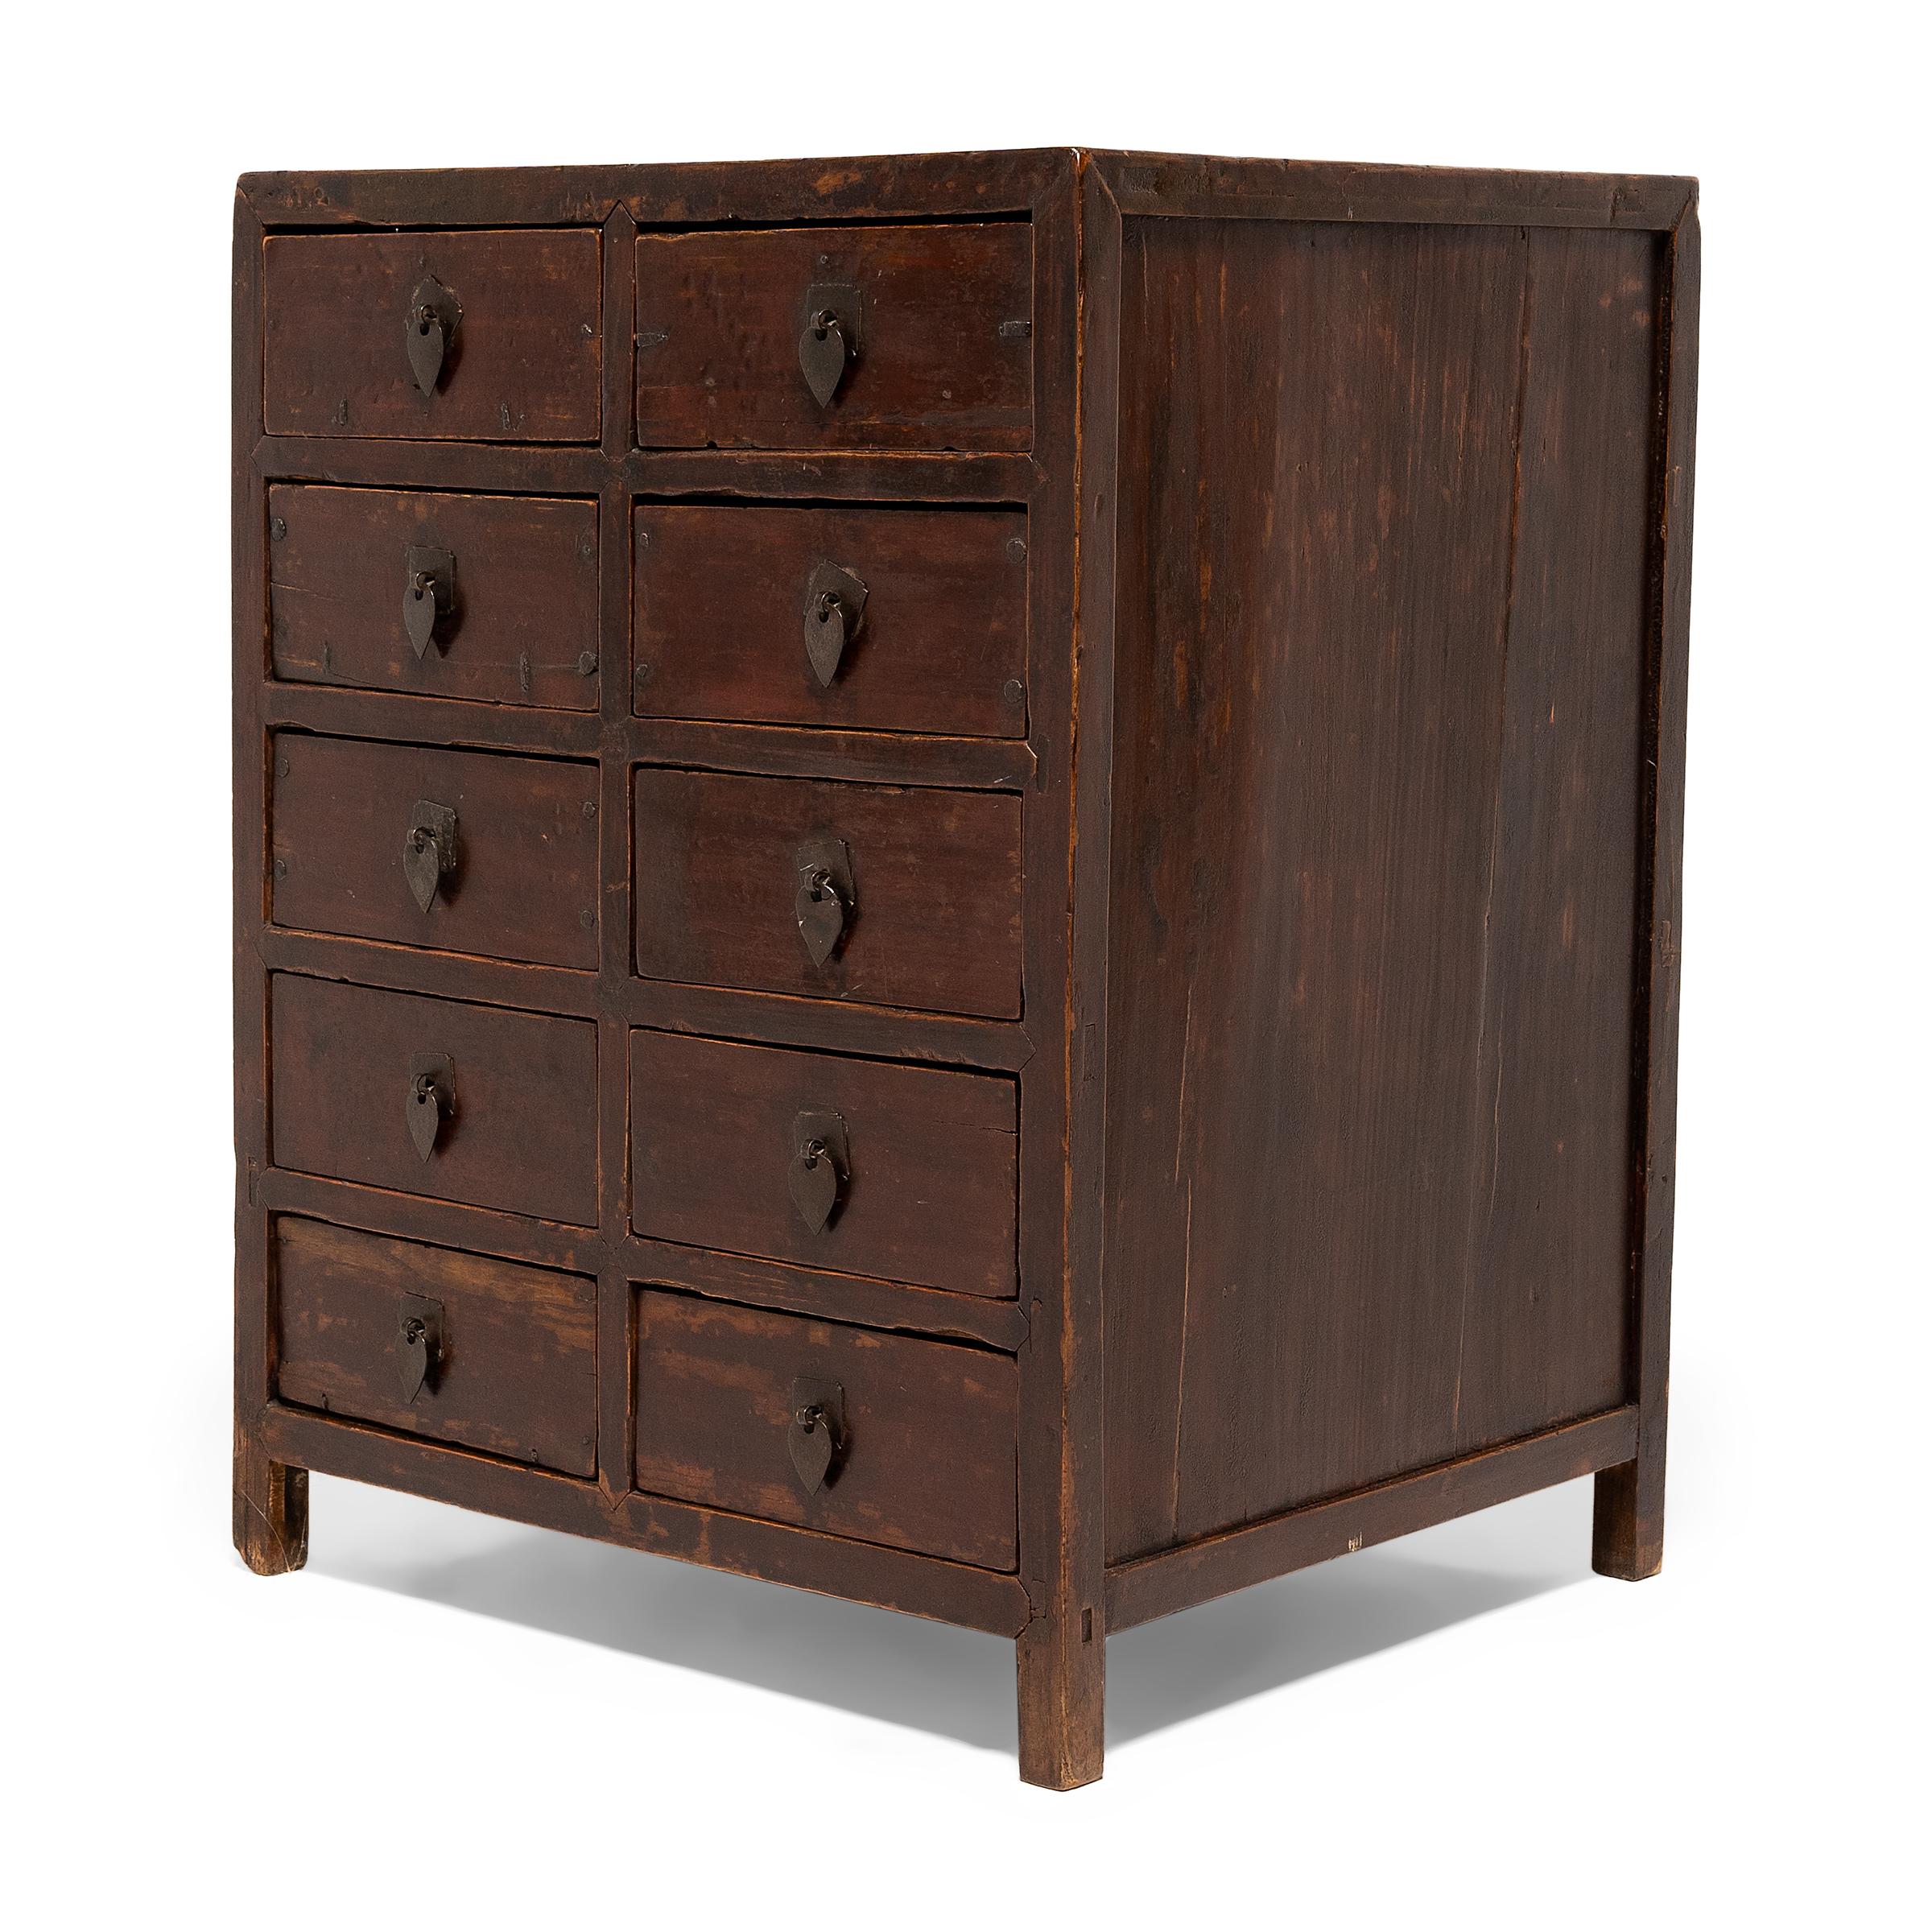 19th Century Chinese Ten Drawer Apothecary Chest, c. 1850